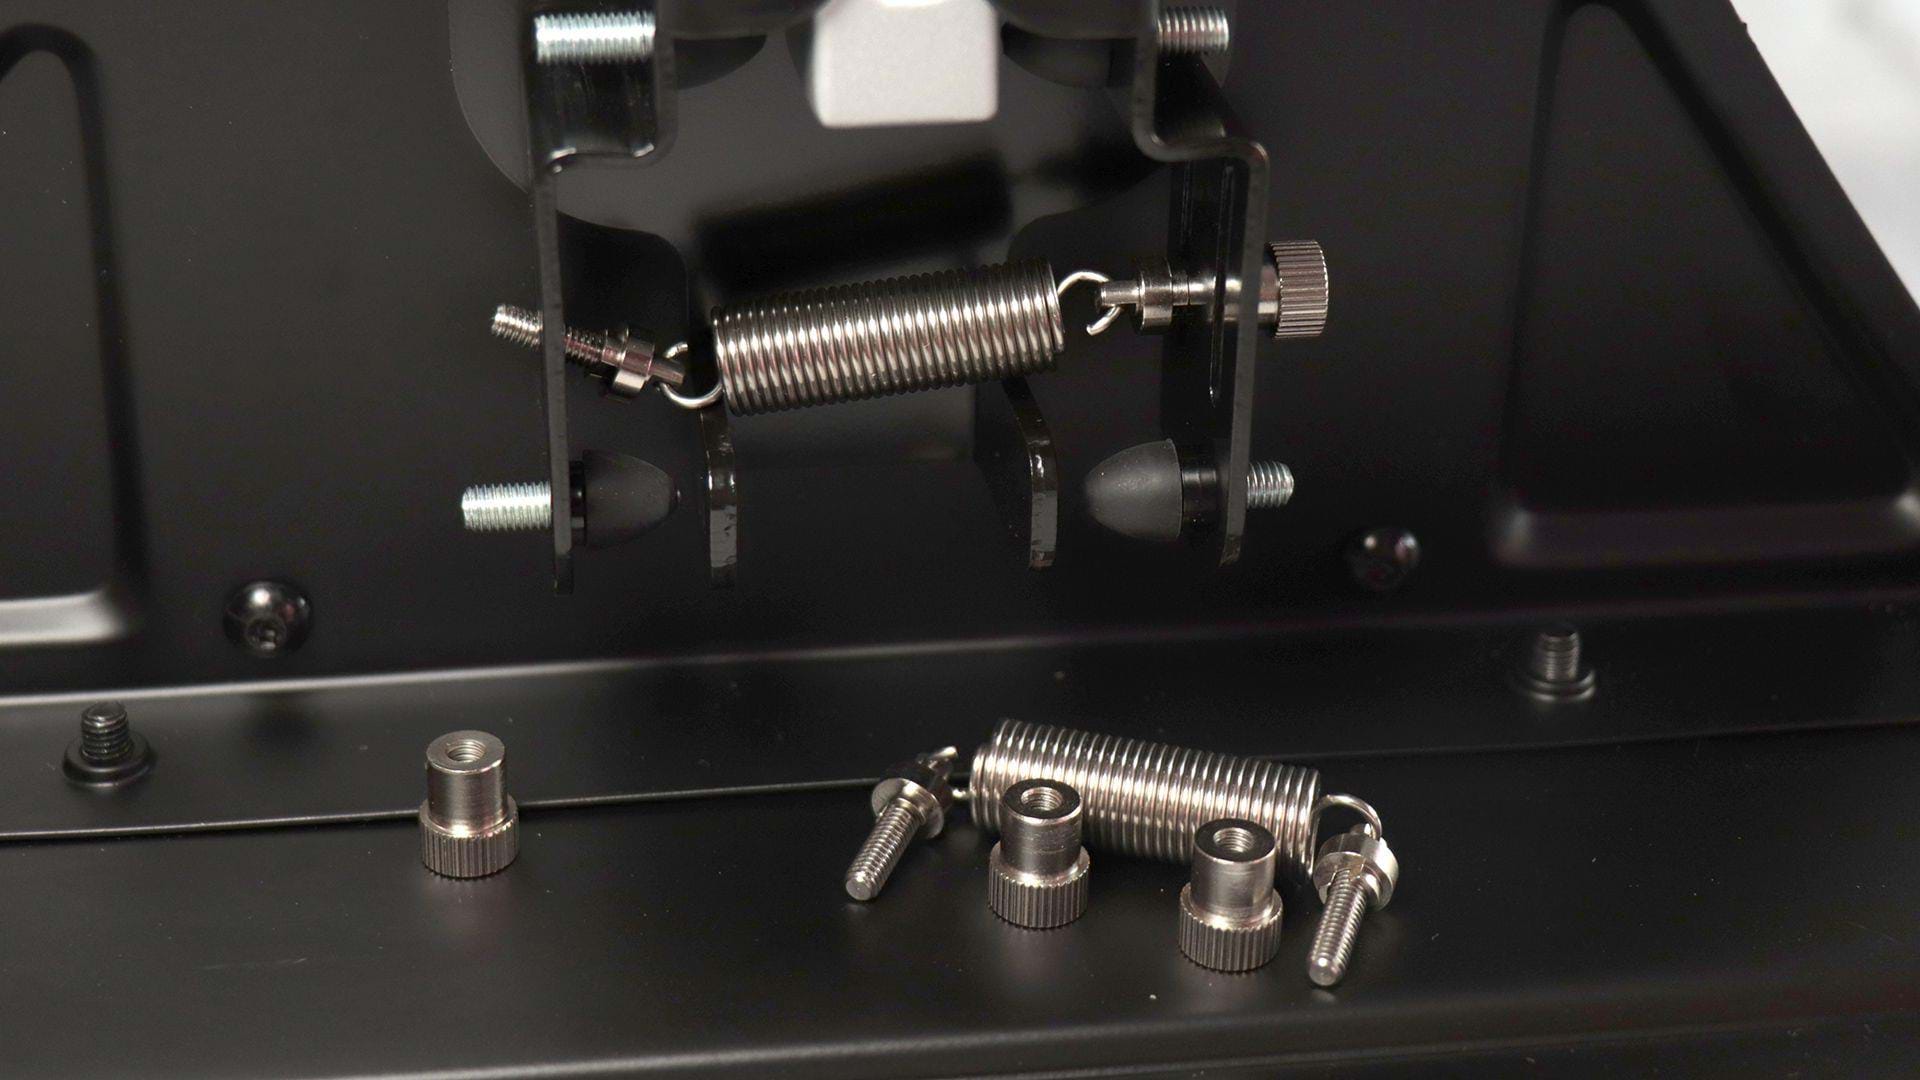 Thrustmaster TPR pedals - removing a spring